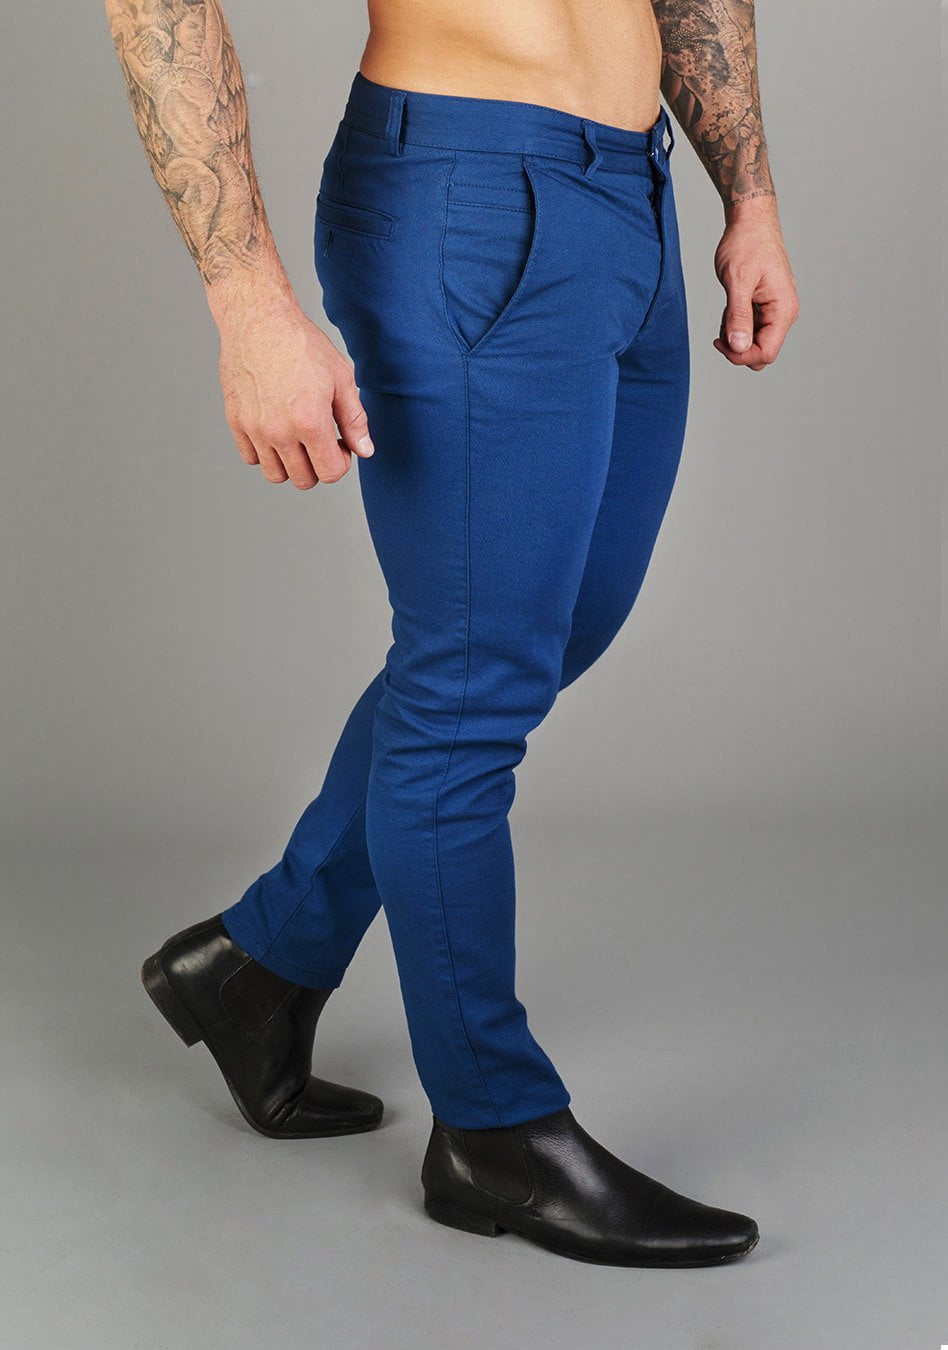 Oxcloth Mid Blue Athletic fit chinos offering a perfect blend of comfort and style for well-built physiques, with a contoured waist and muscle fit design for an on-trend appearance.